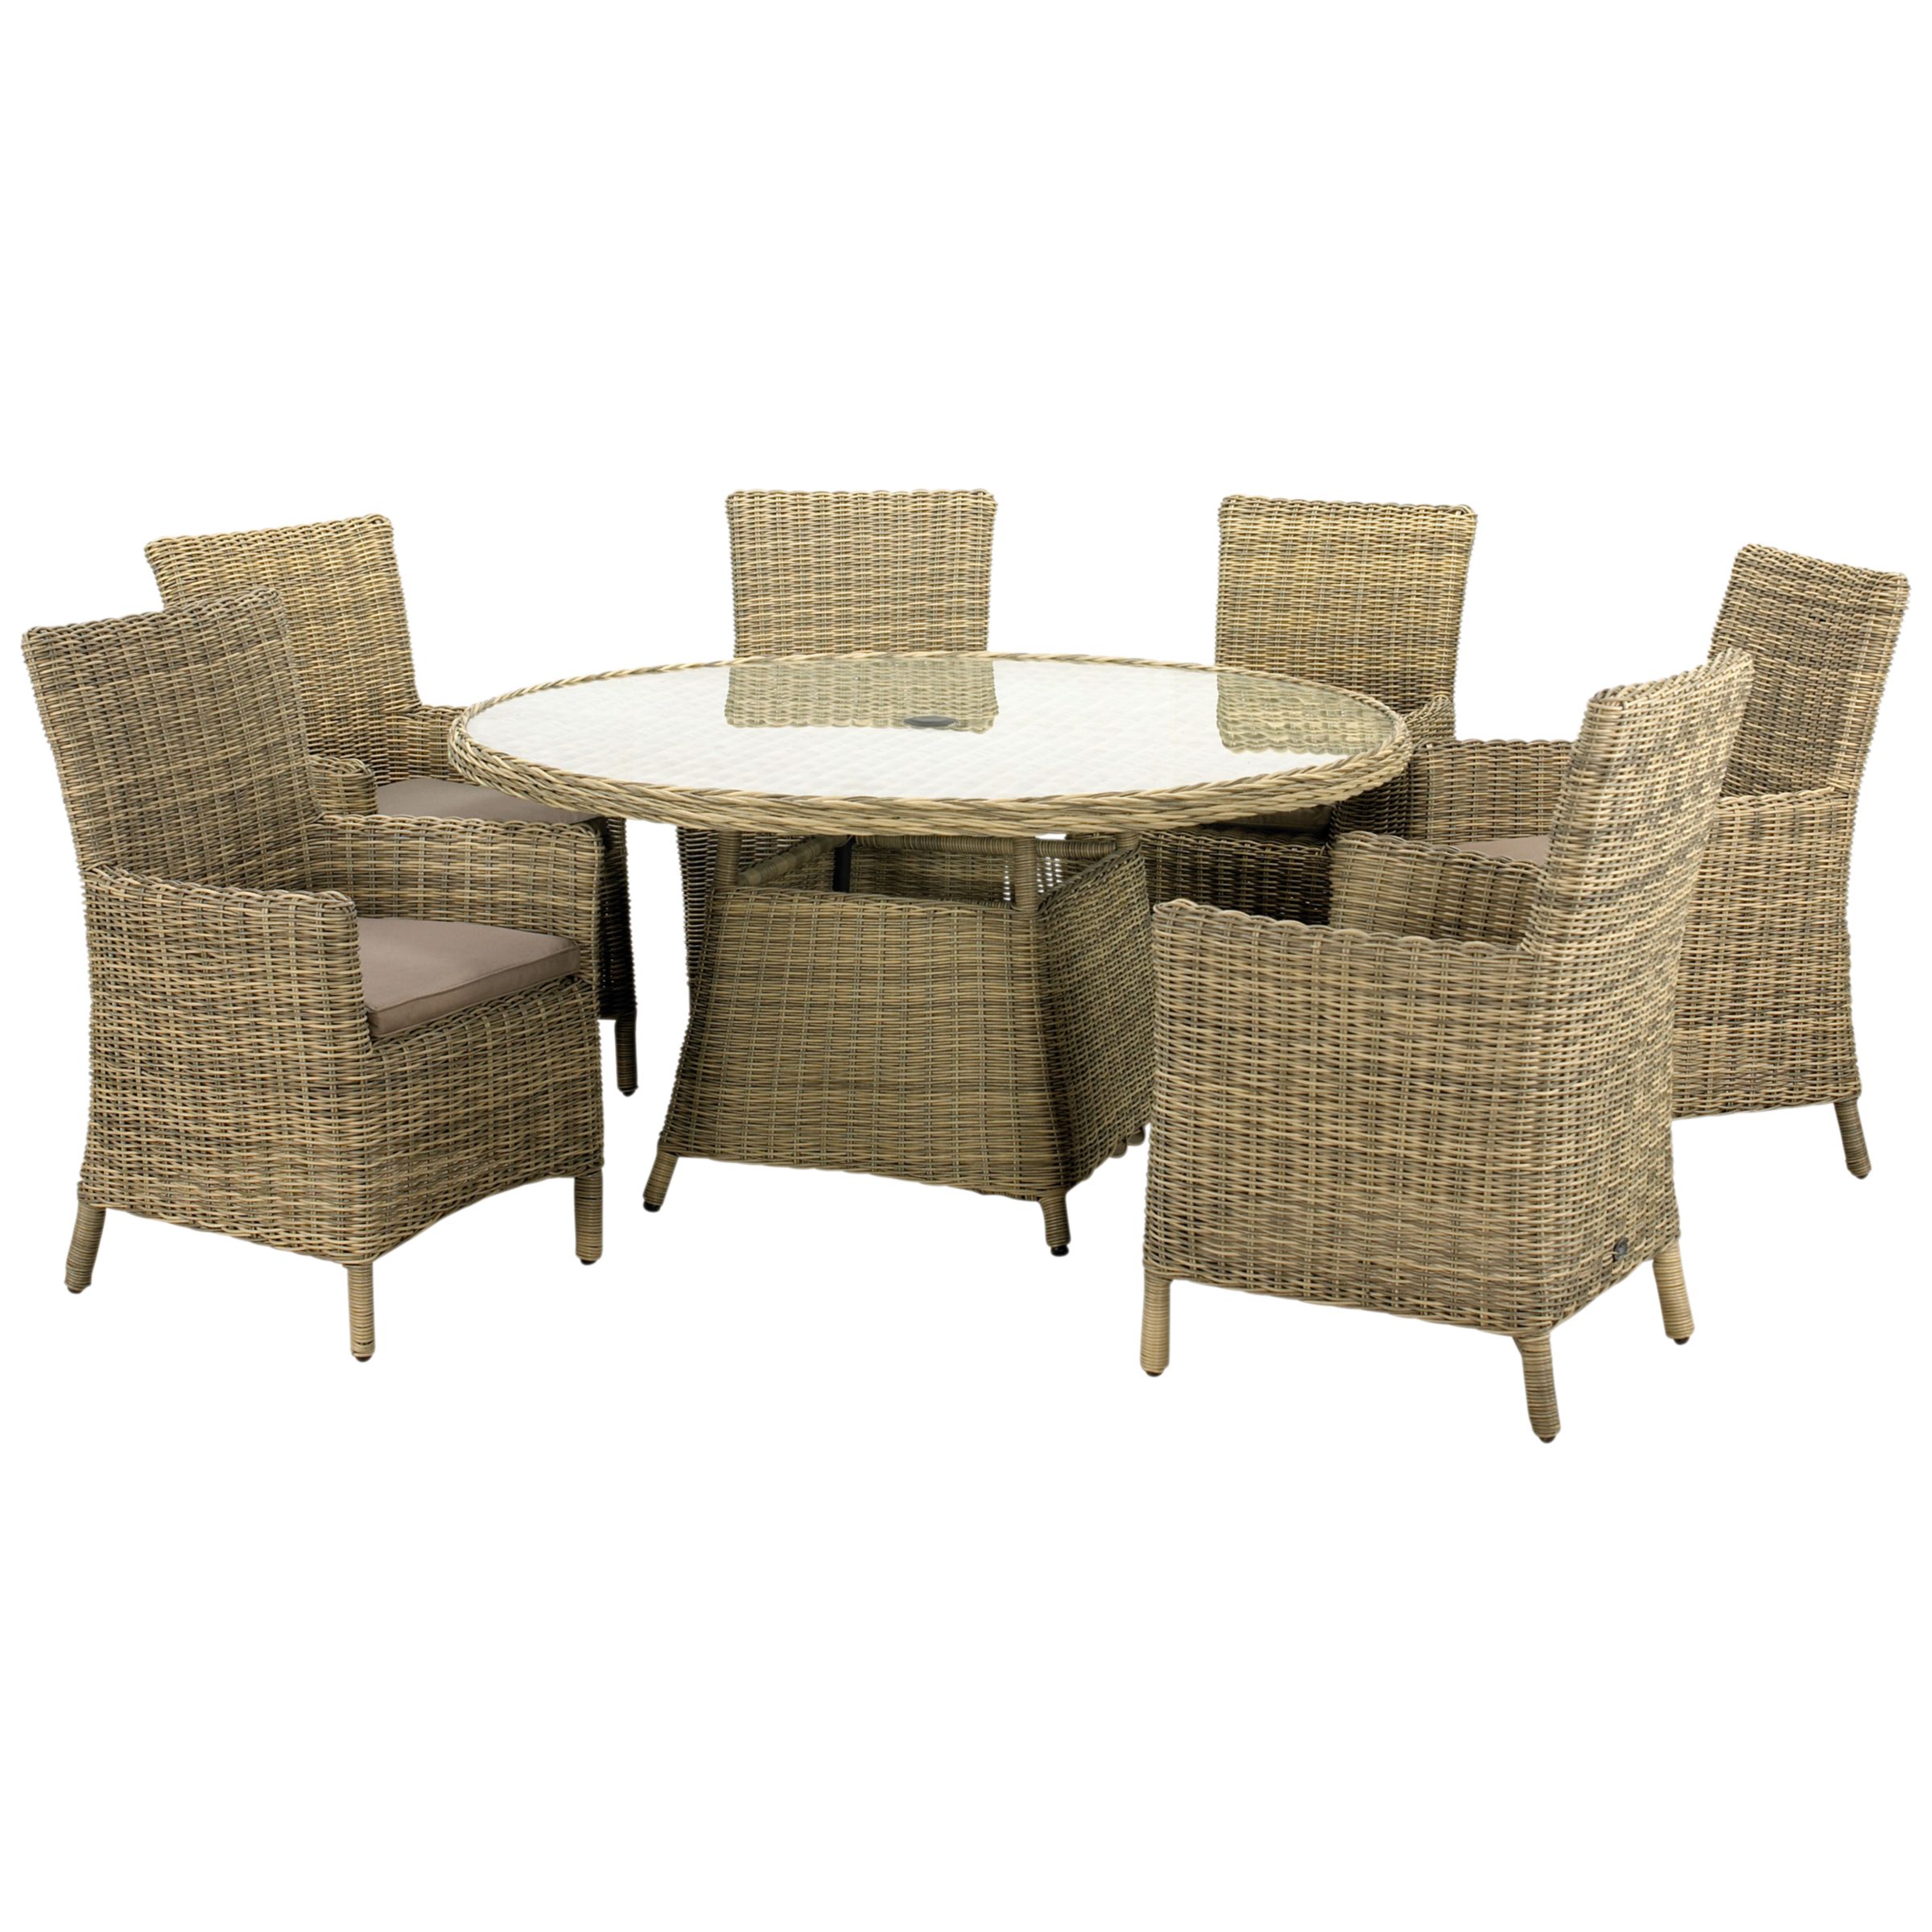 Buy Royalcraft Wentworth Carver 6-Seater Outdoor Dining Set Online at johnlewis.com